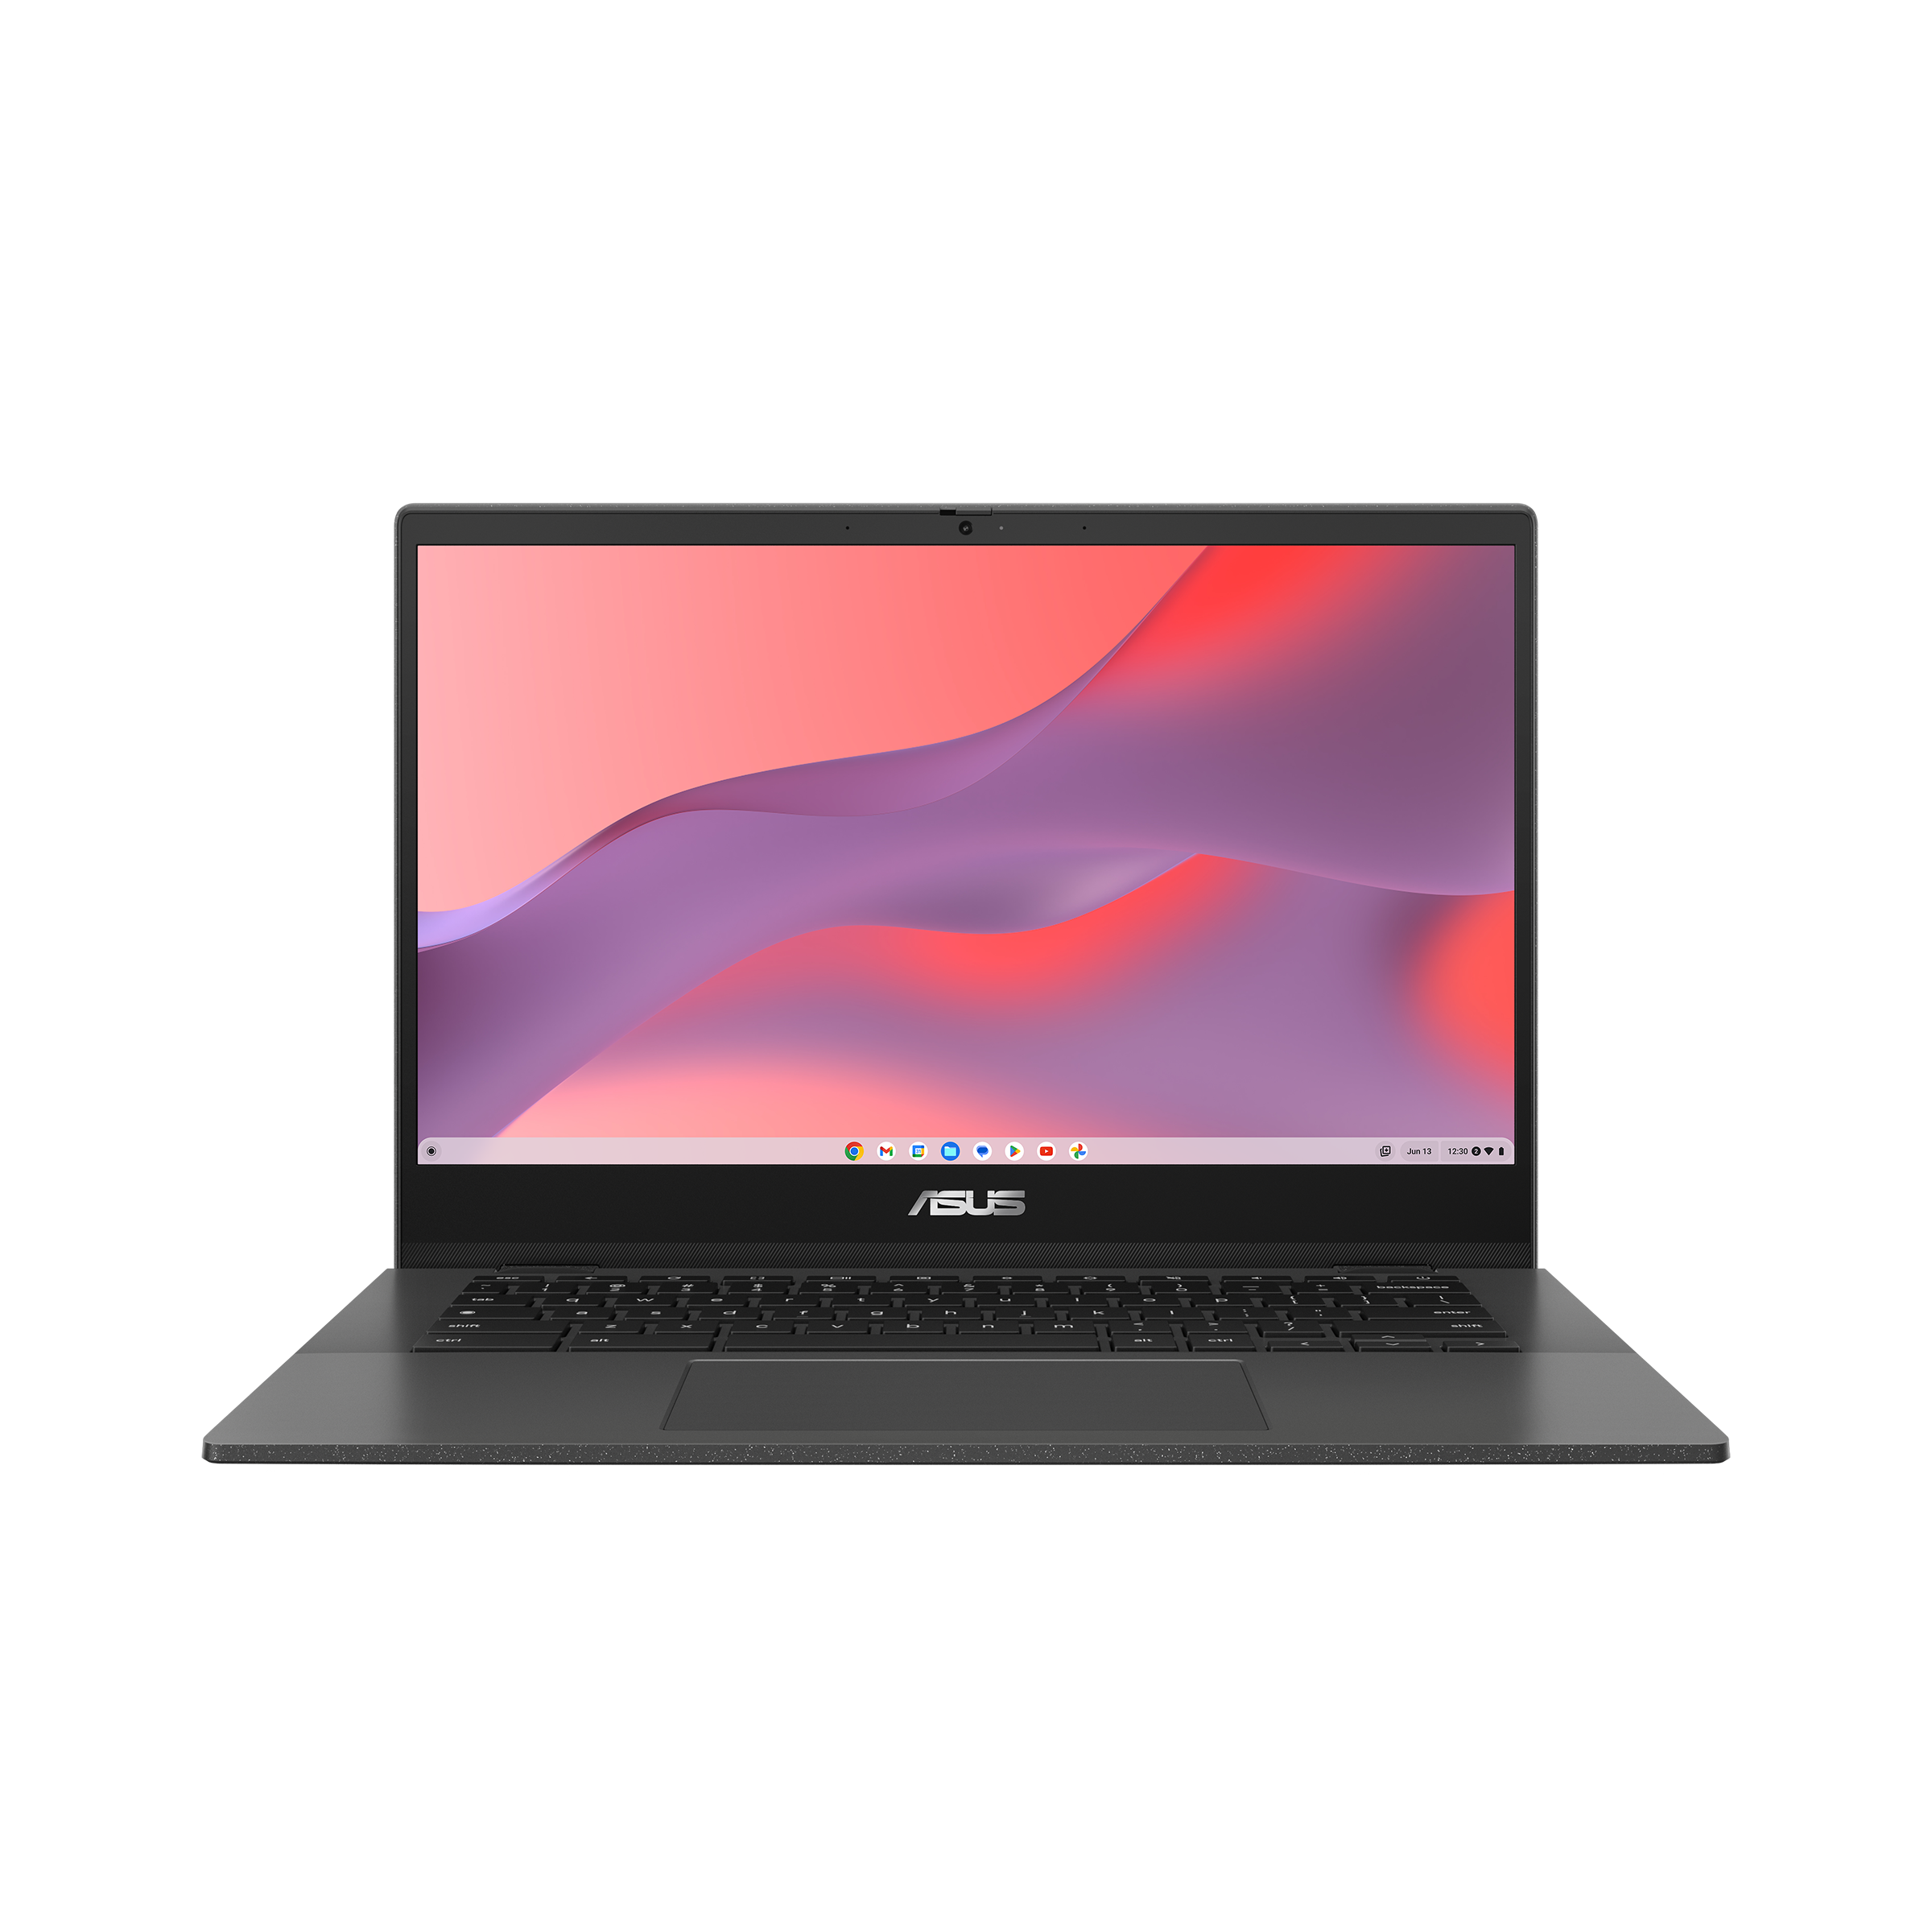 Asus chromebook • Compare (77 products) see prices »